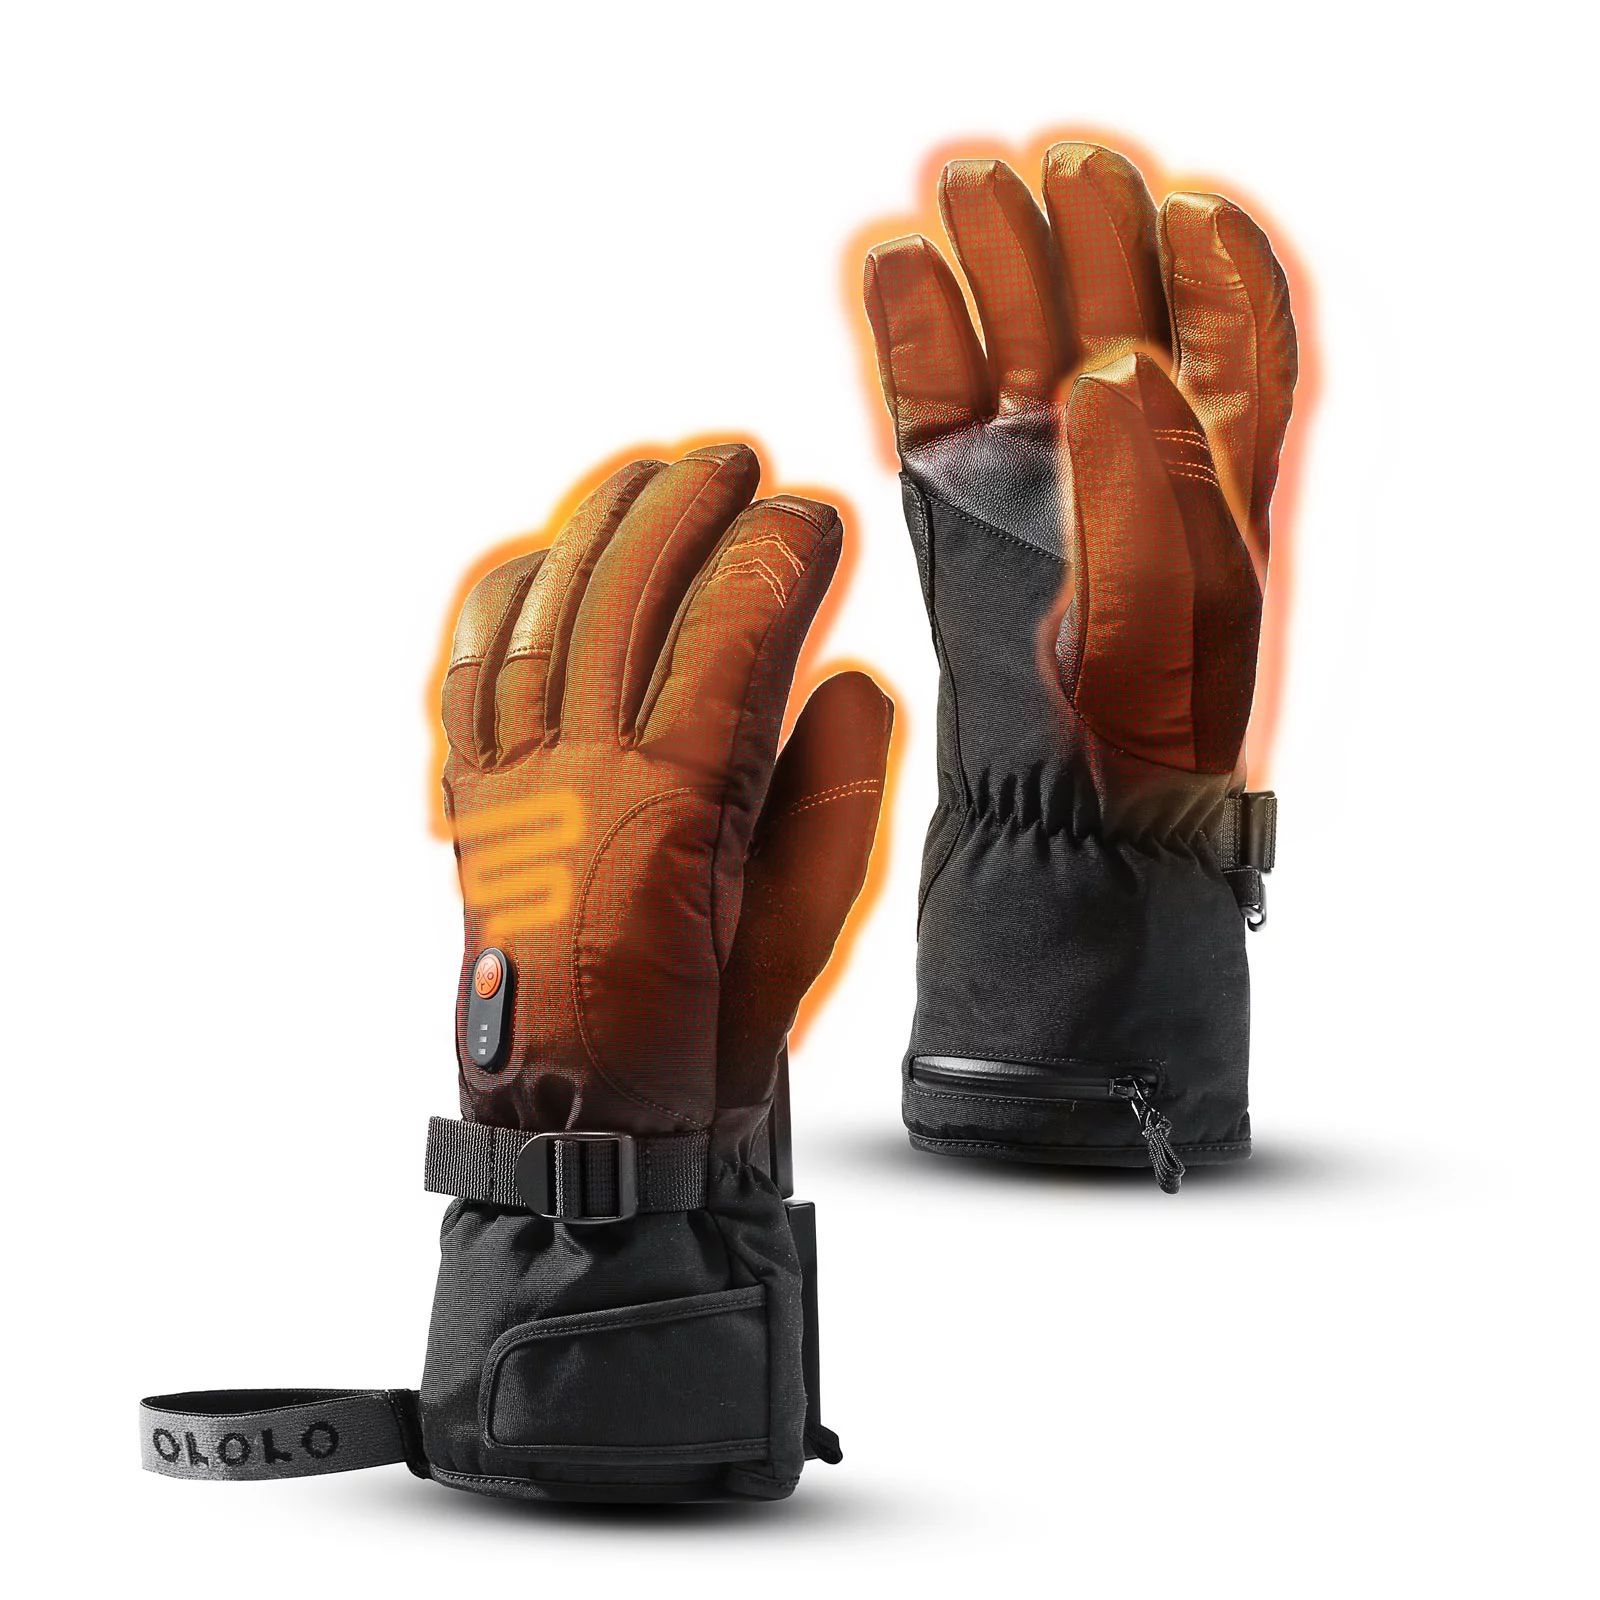 ORORO Heated Gloves for Men and Women, Rechargeable Electric Gloves for Hiking Skiing Motorcycle ... | Walmart (US)